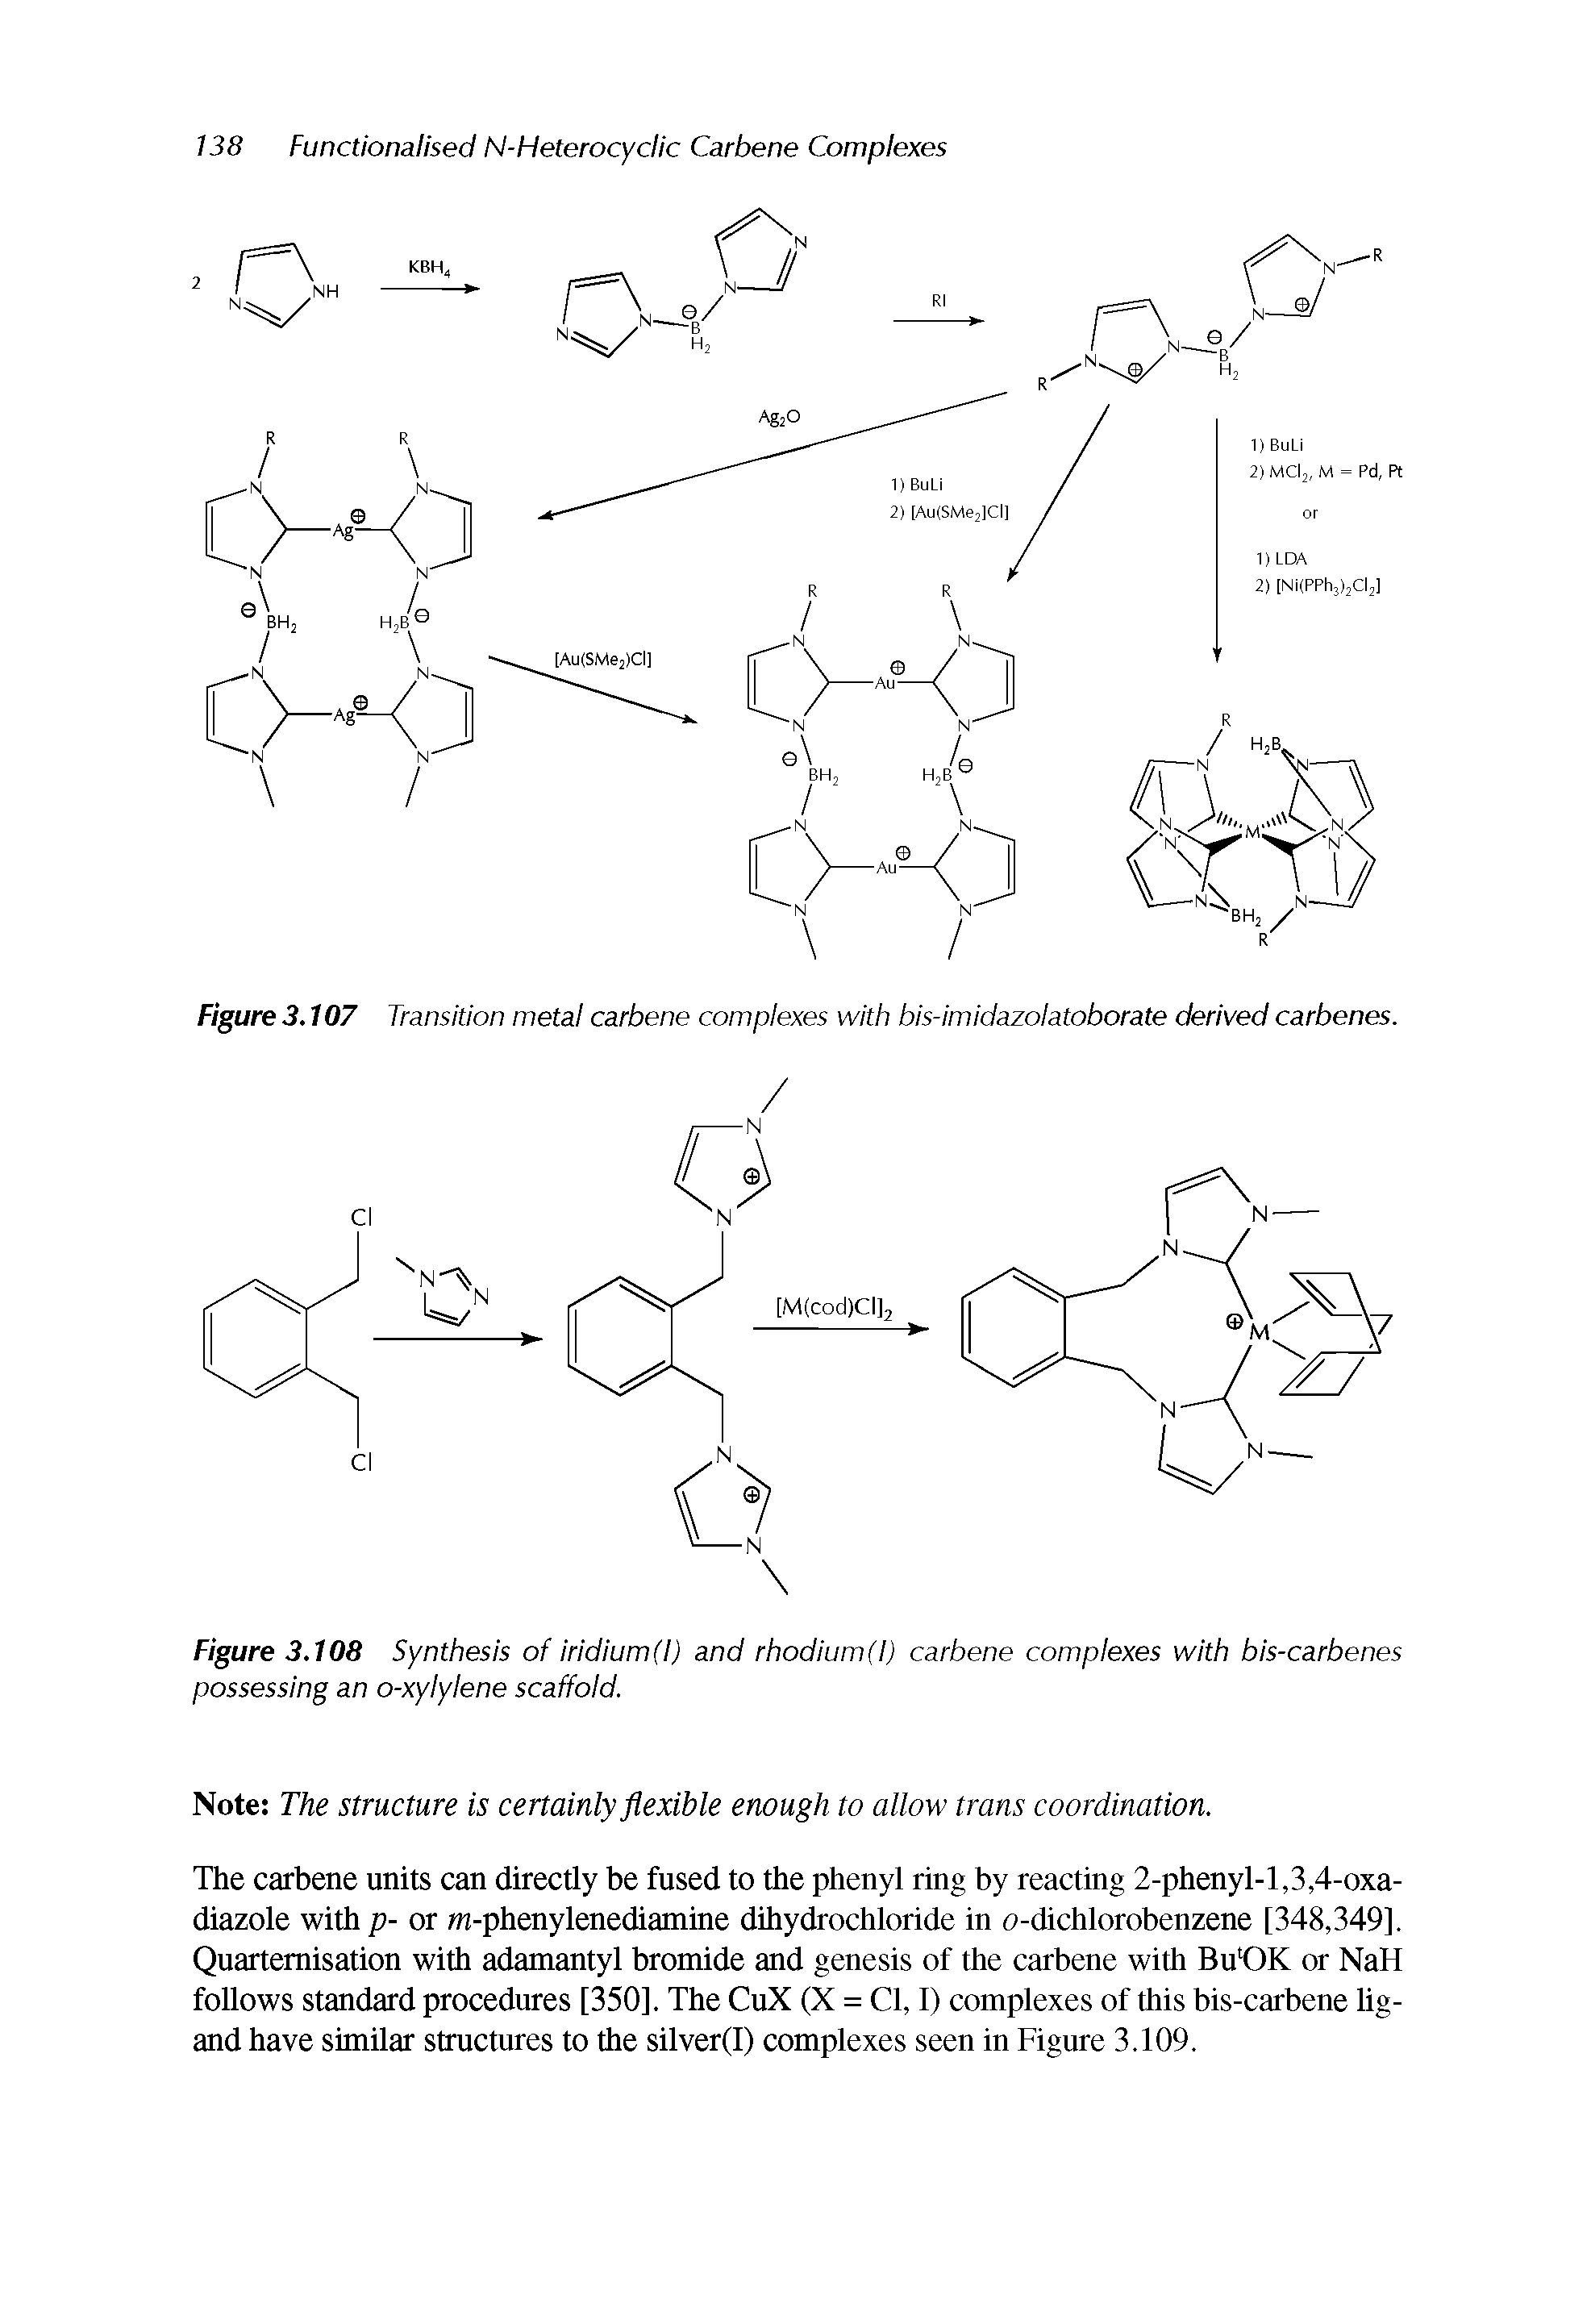 Figure 3,108 Synthesis of iridium(l) and rhodium(l) carbene complexes with bis-carbenes possessing an o-xylylene scaffold.